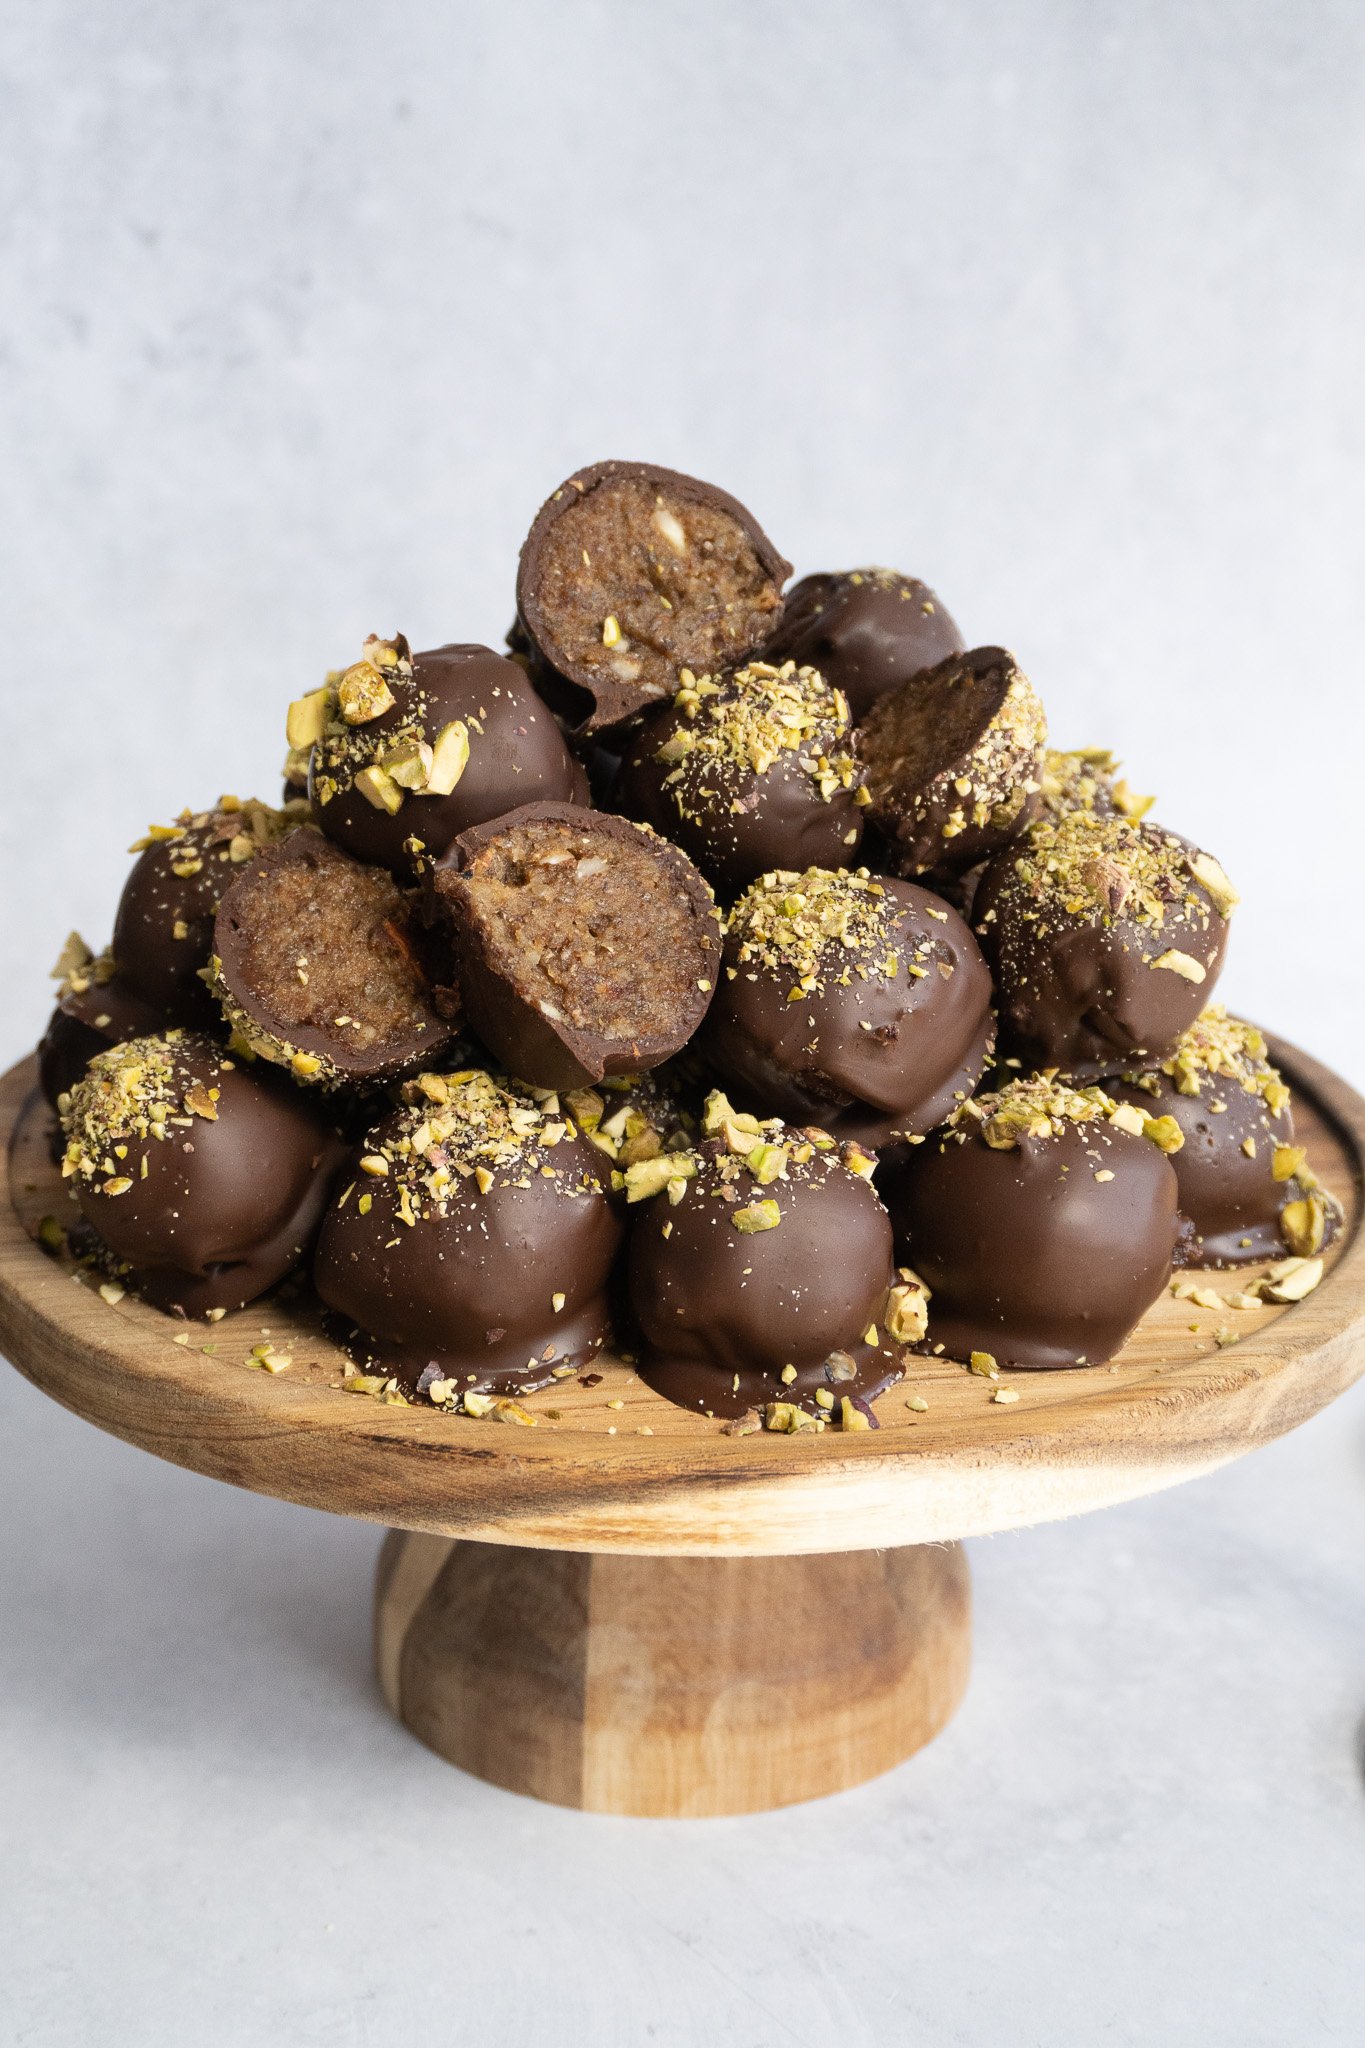 A plate of delicious 10 minute chocolate date truffles coated in chocolate and topped with pistachios.